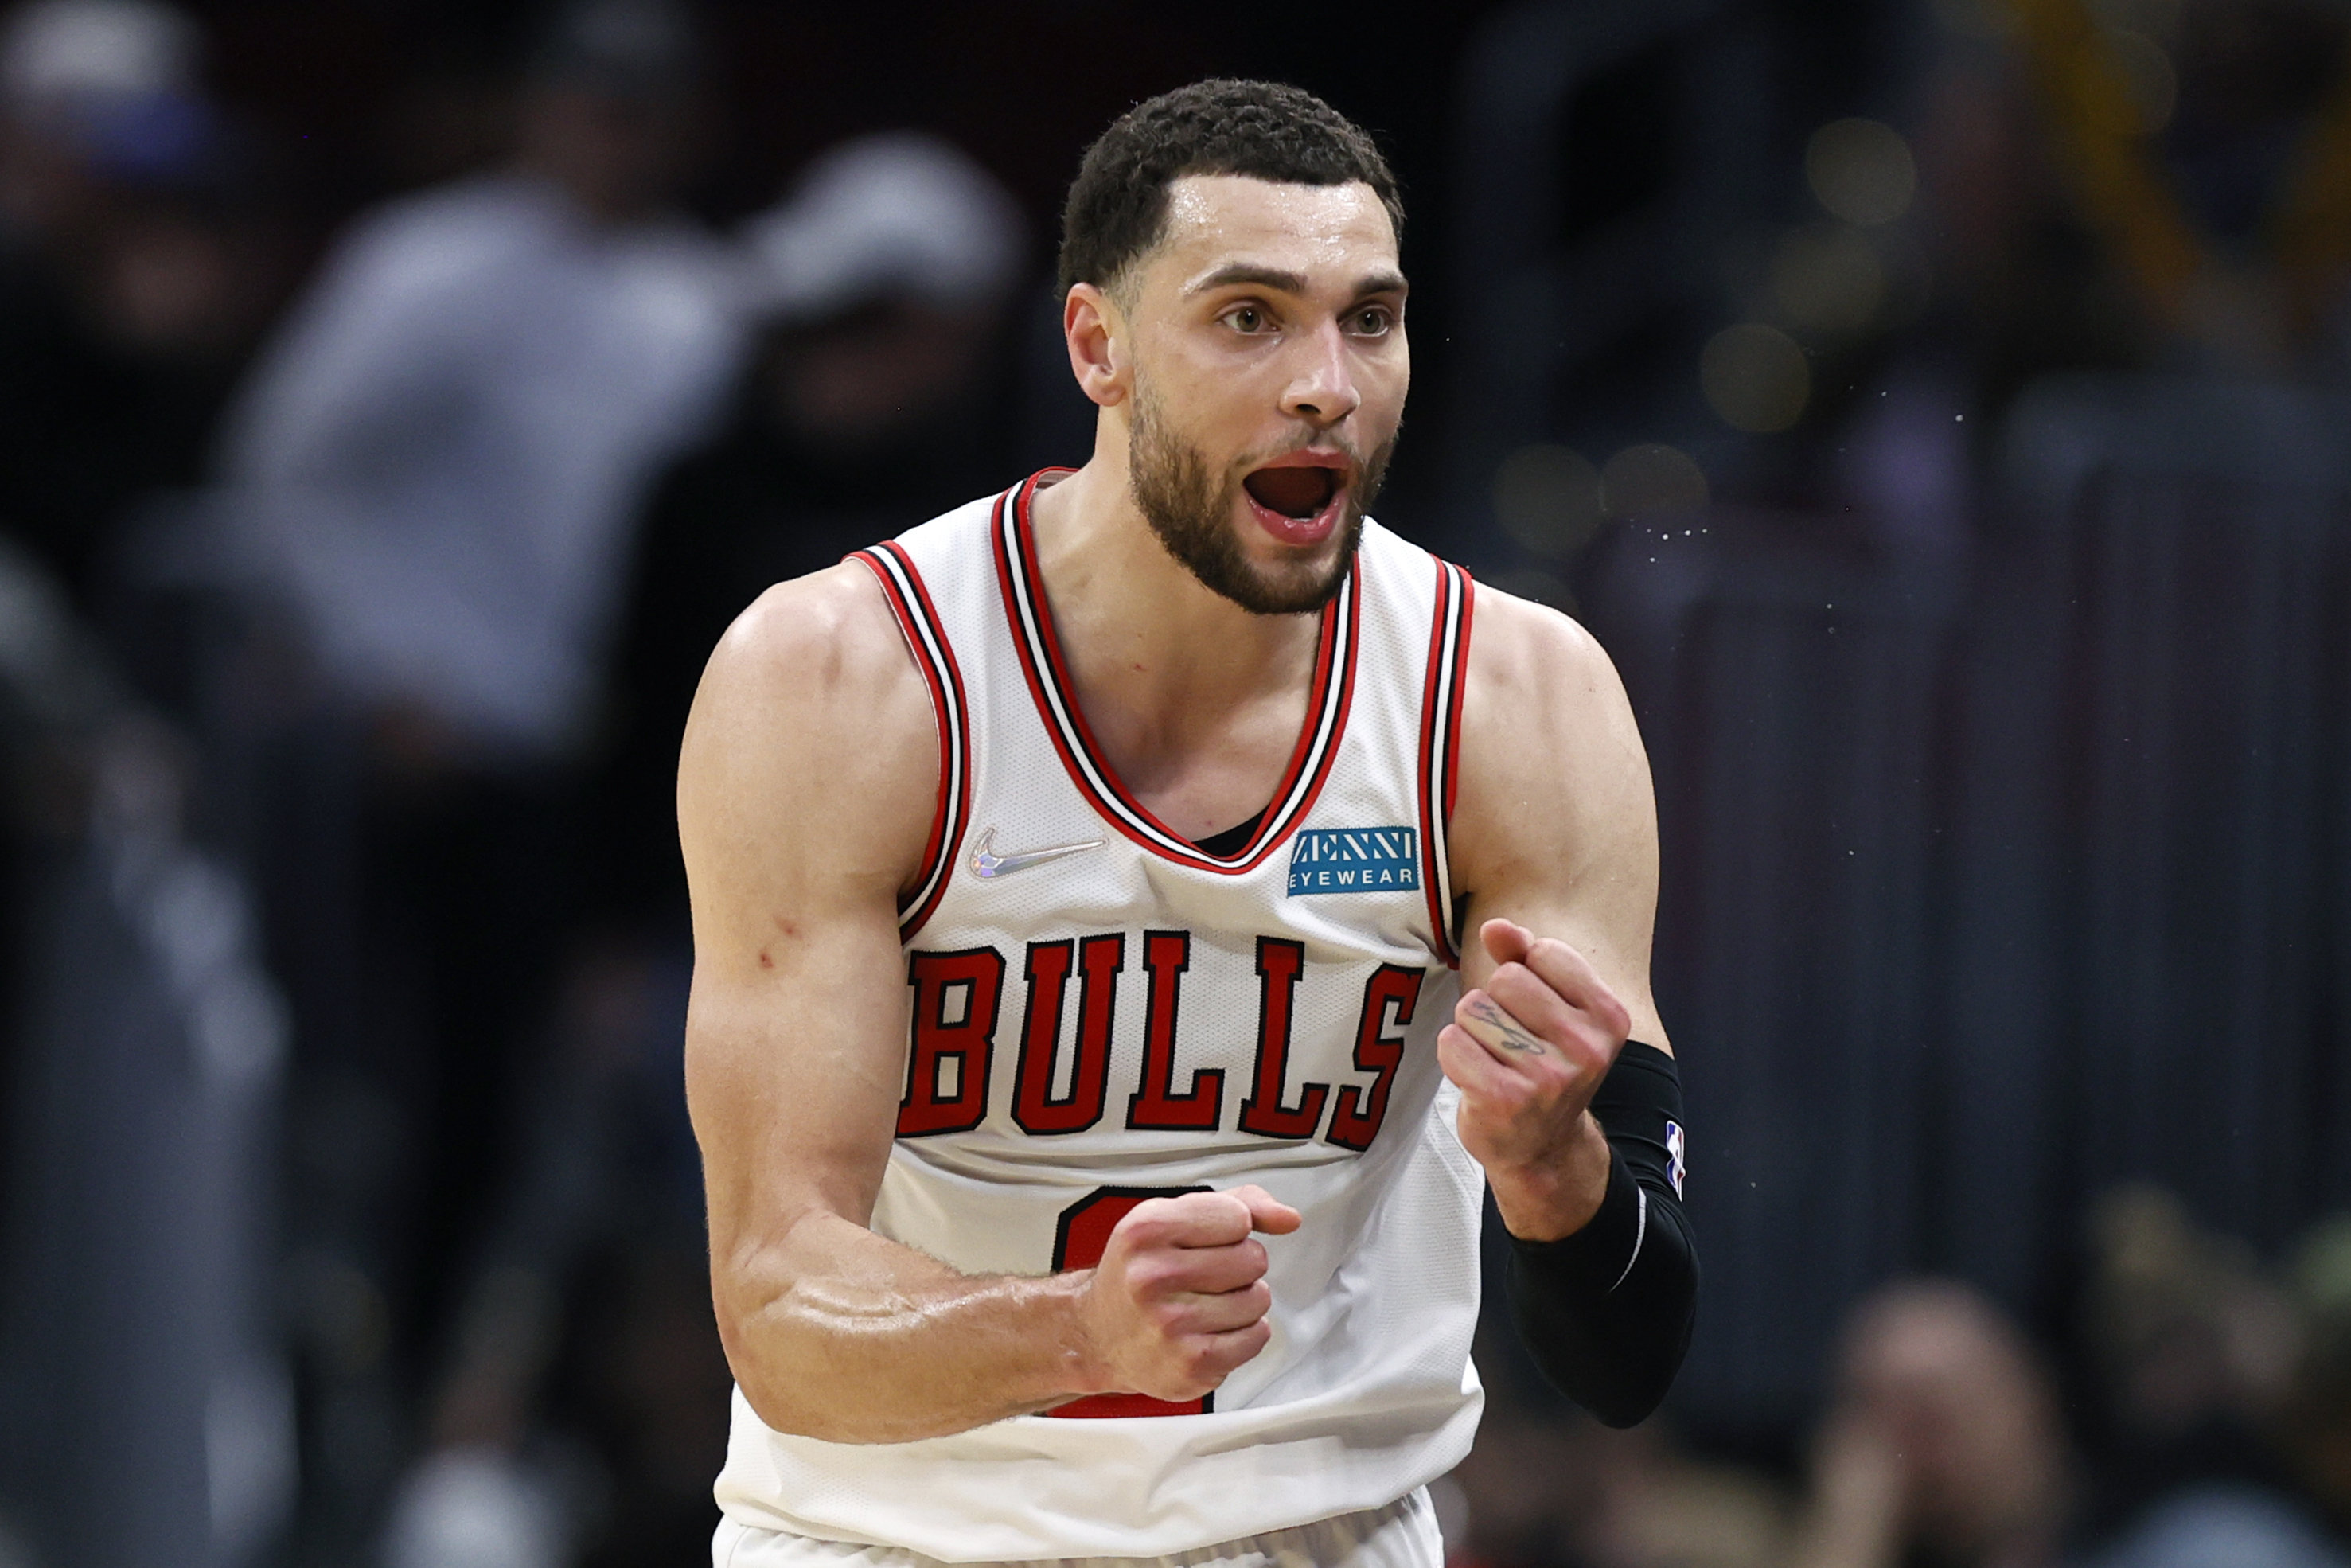 Bulls' 2022 Free Agents, Targets and Draft Needs After NBA Playoff